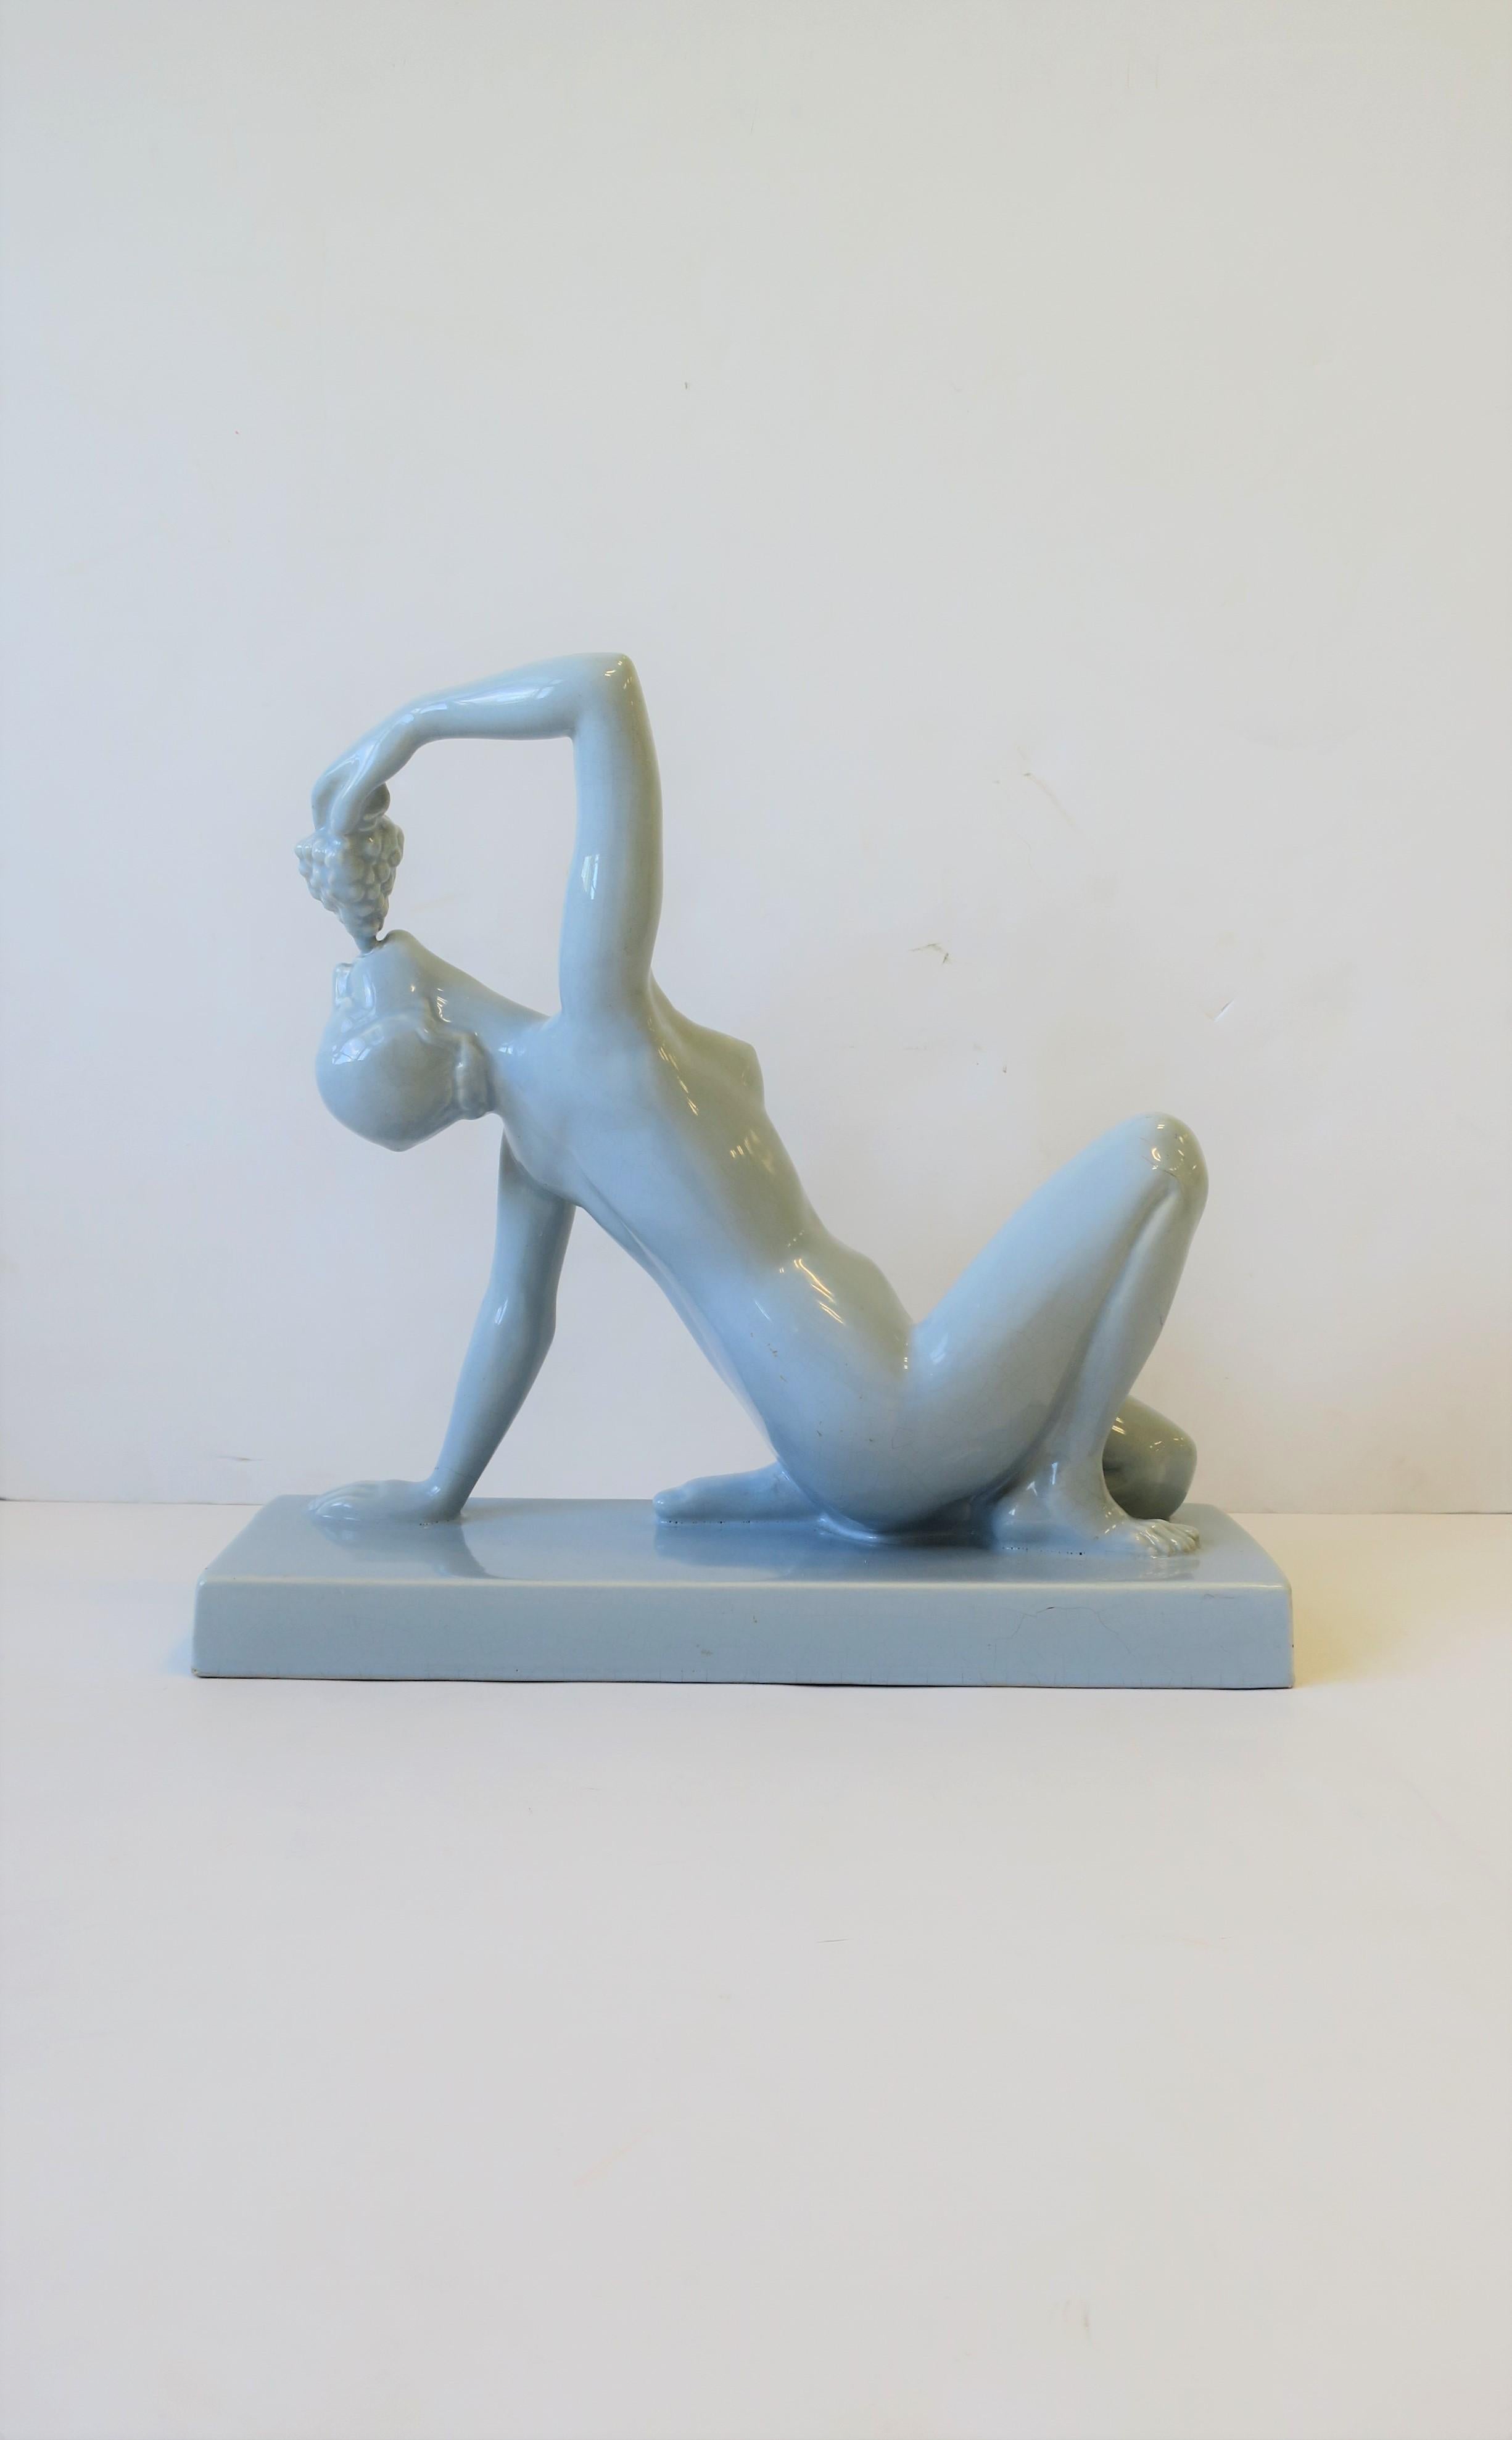 20th Century French Art Deco Period Sculpture by Sculptor Hernri Fugere